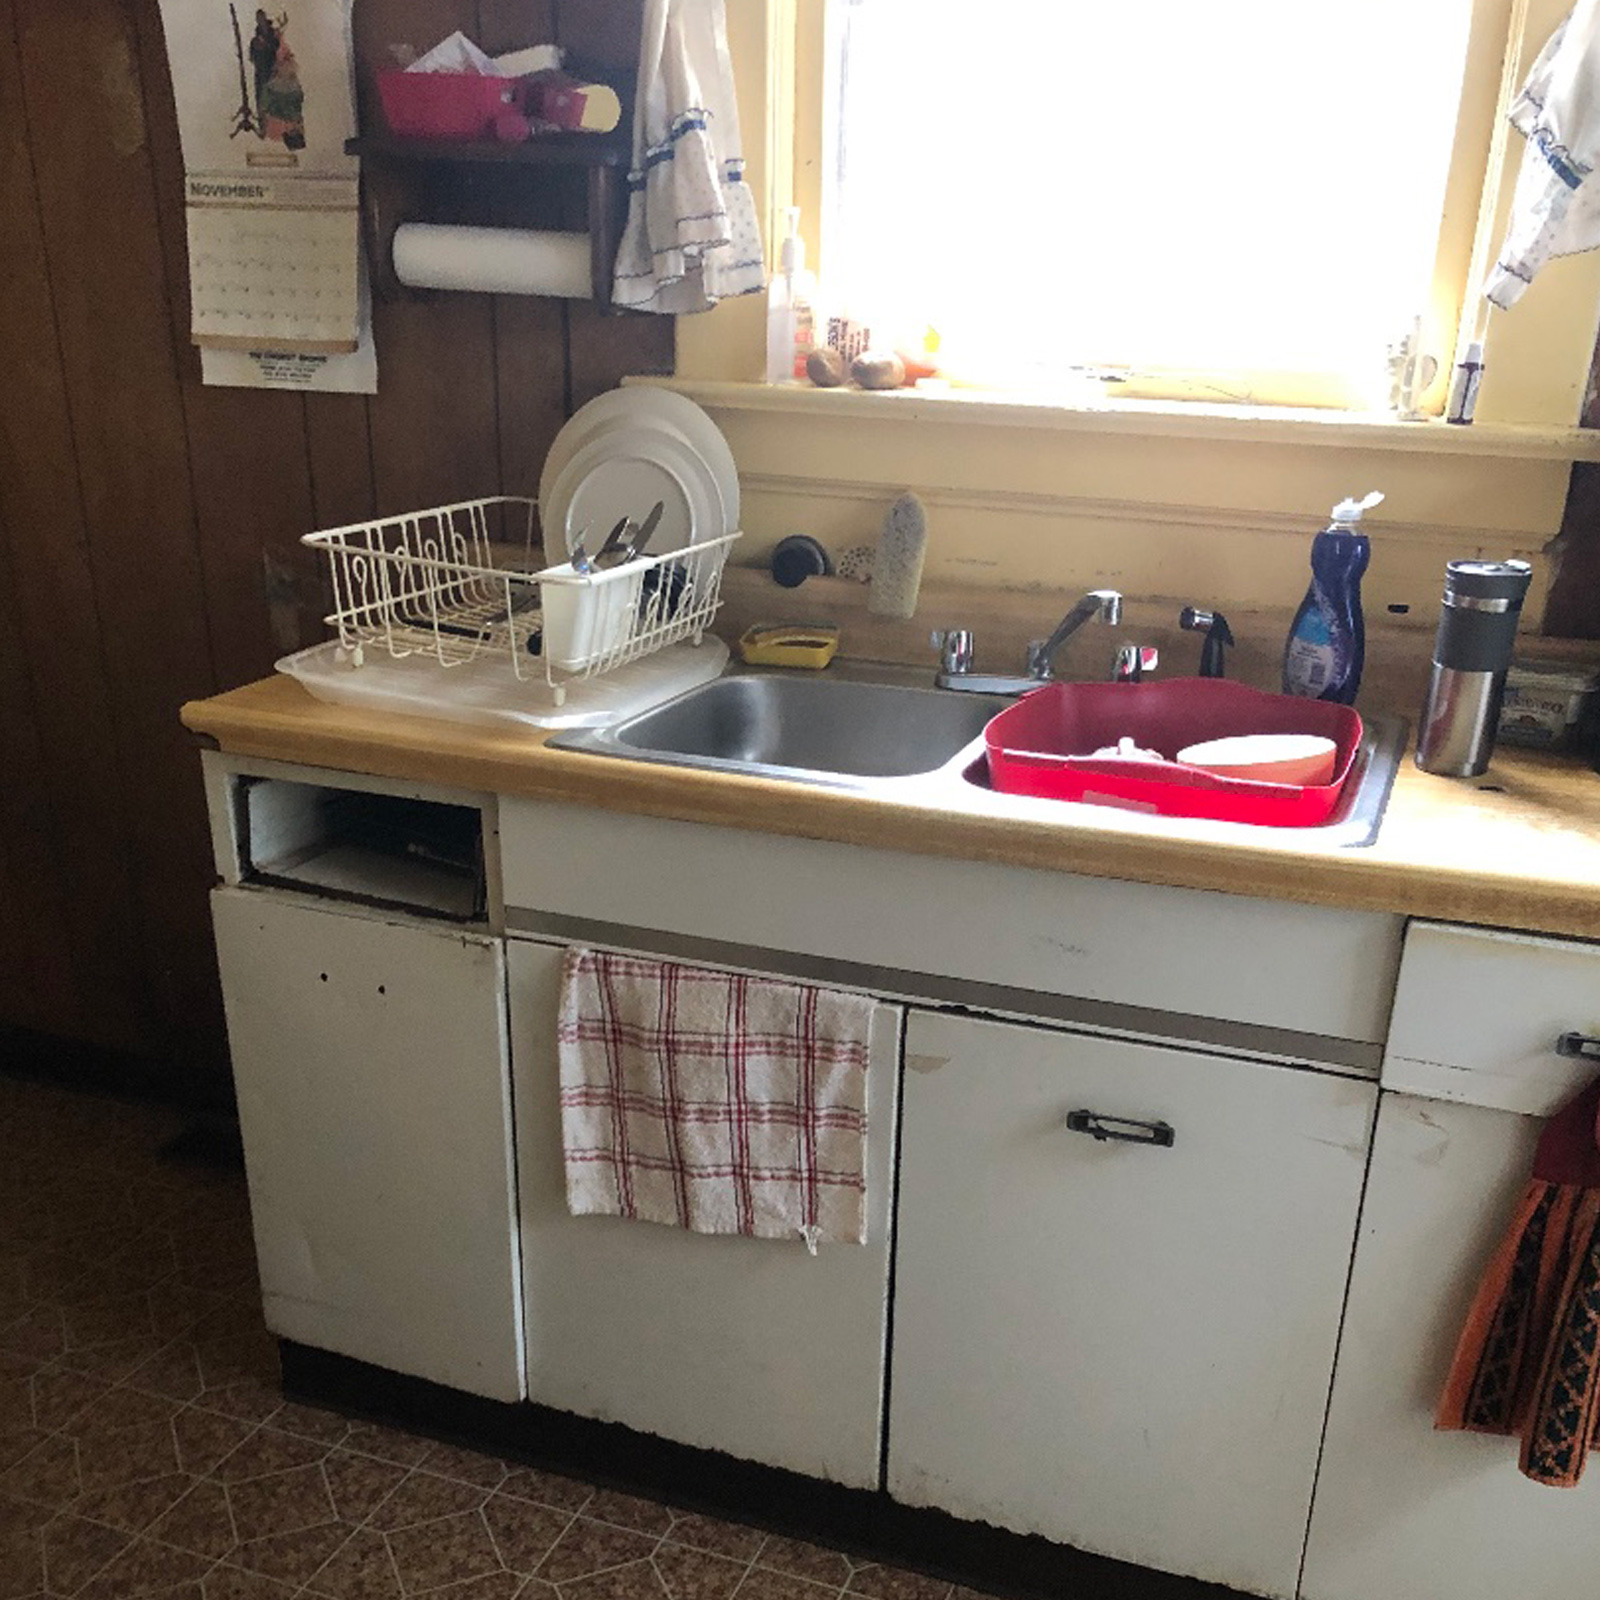 Entry 28 - These worn out cabinets definitely need to be replaced